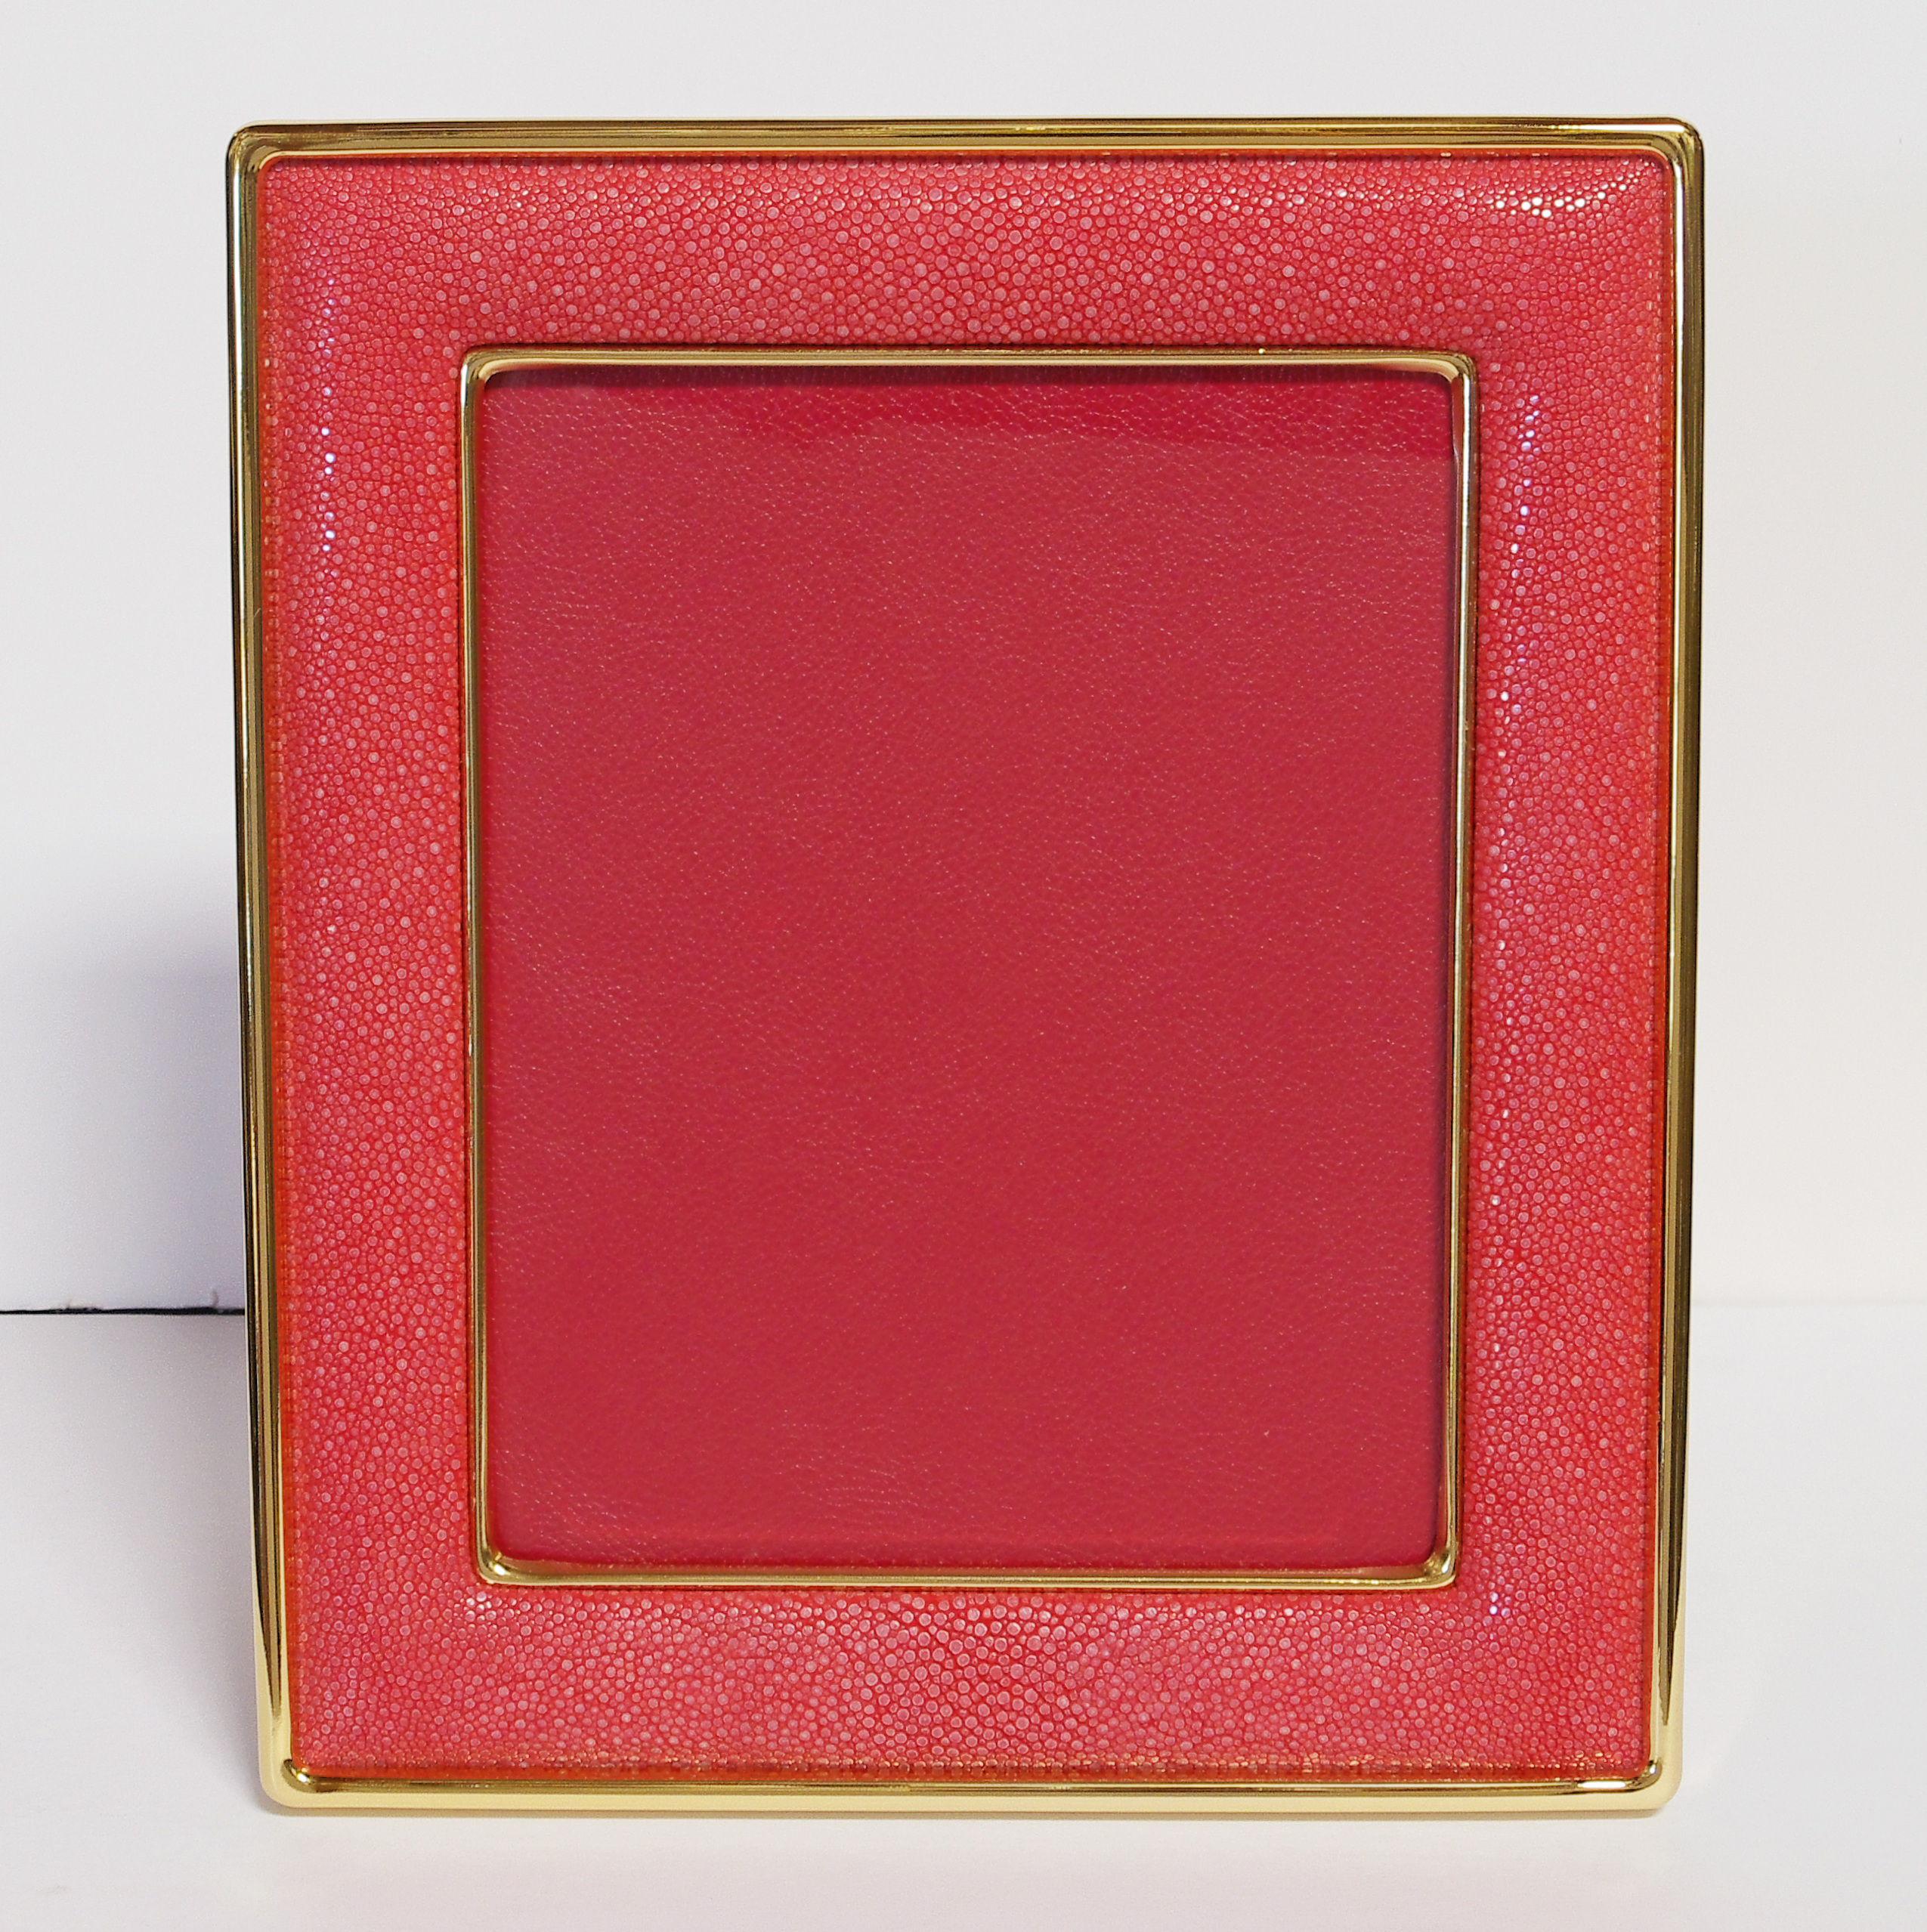 Red shagreen leather and 24 karat gold-plated photo frame with presentation red leather box by Fabio Ltd
Height: 13 inches / Width: 11.5 inches / Depth: 1 inch 
Photo Size: 8 inches by 10 inches
LAST 2 in stock in Los Angeles
Order Reference #: